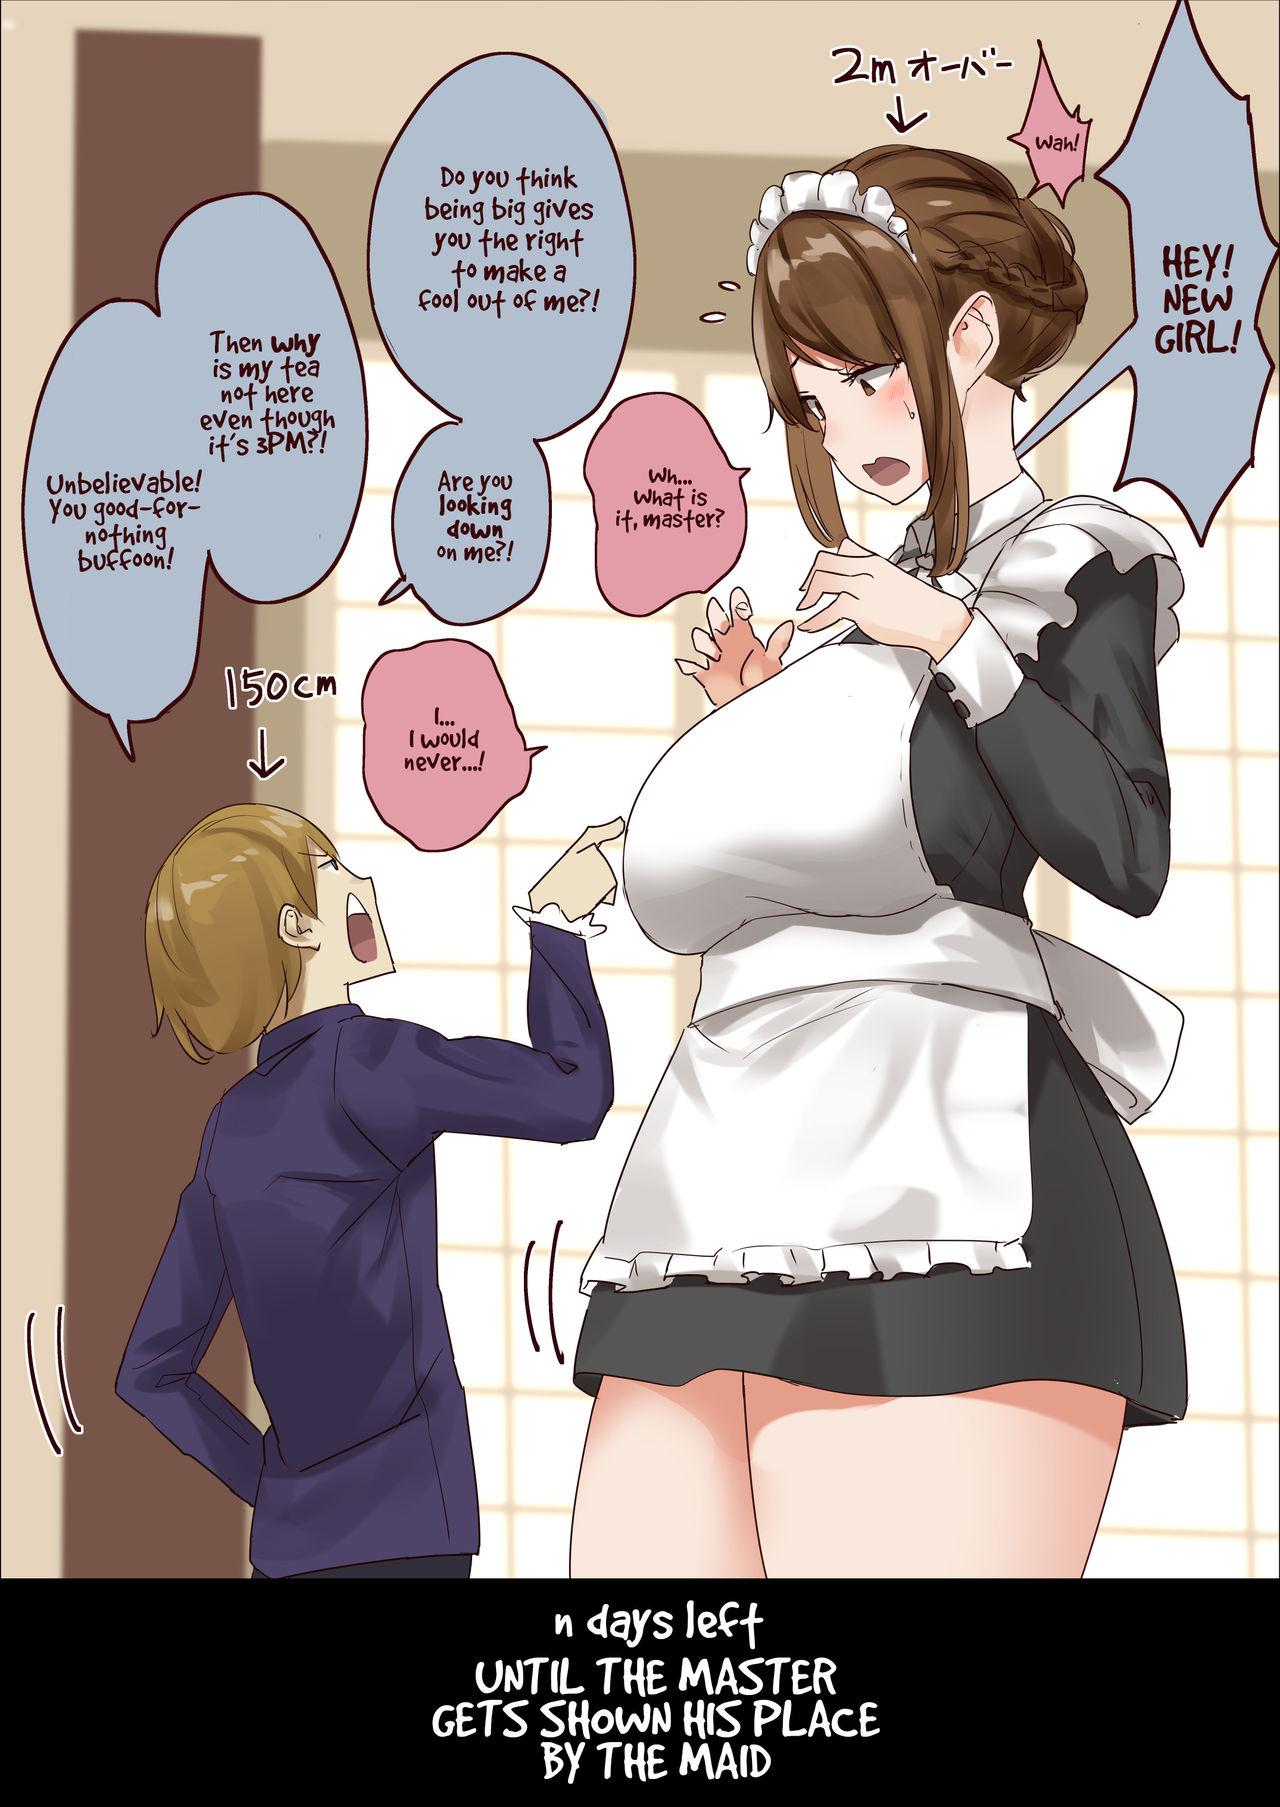 Off master and maid - Original Stretching - Page 1